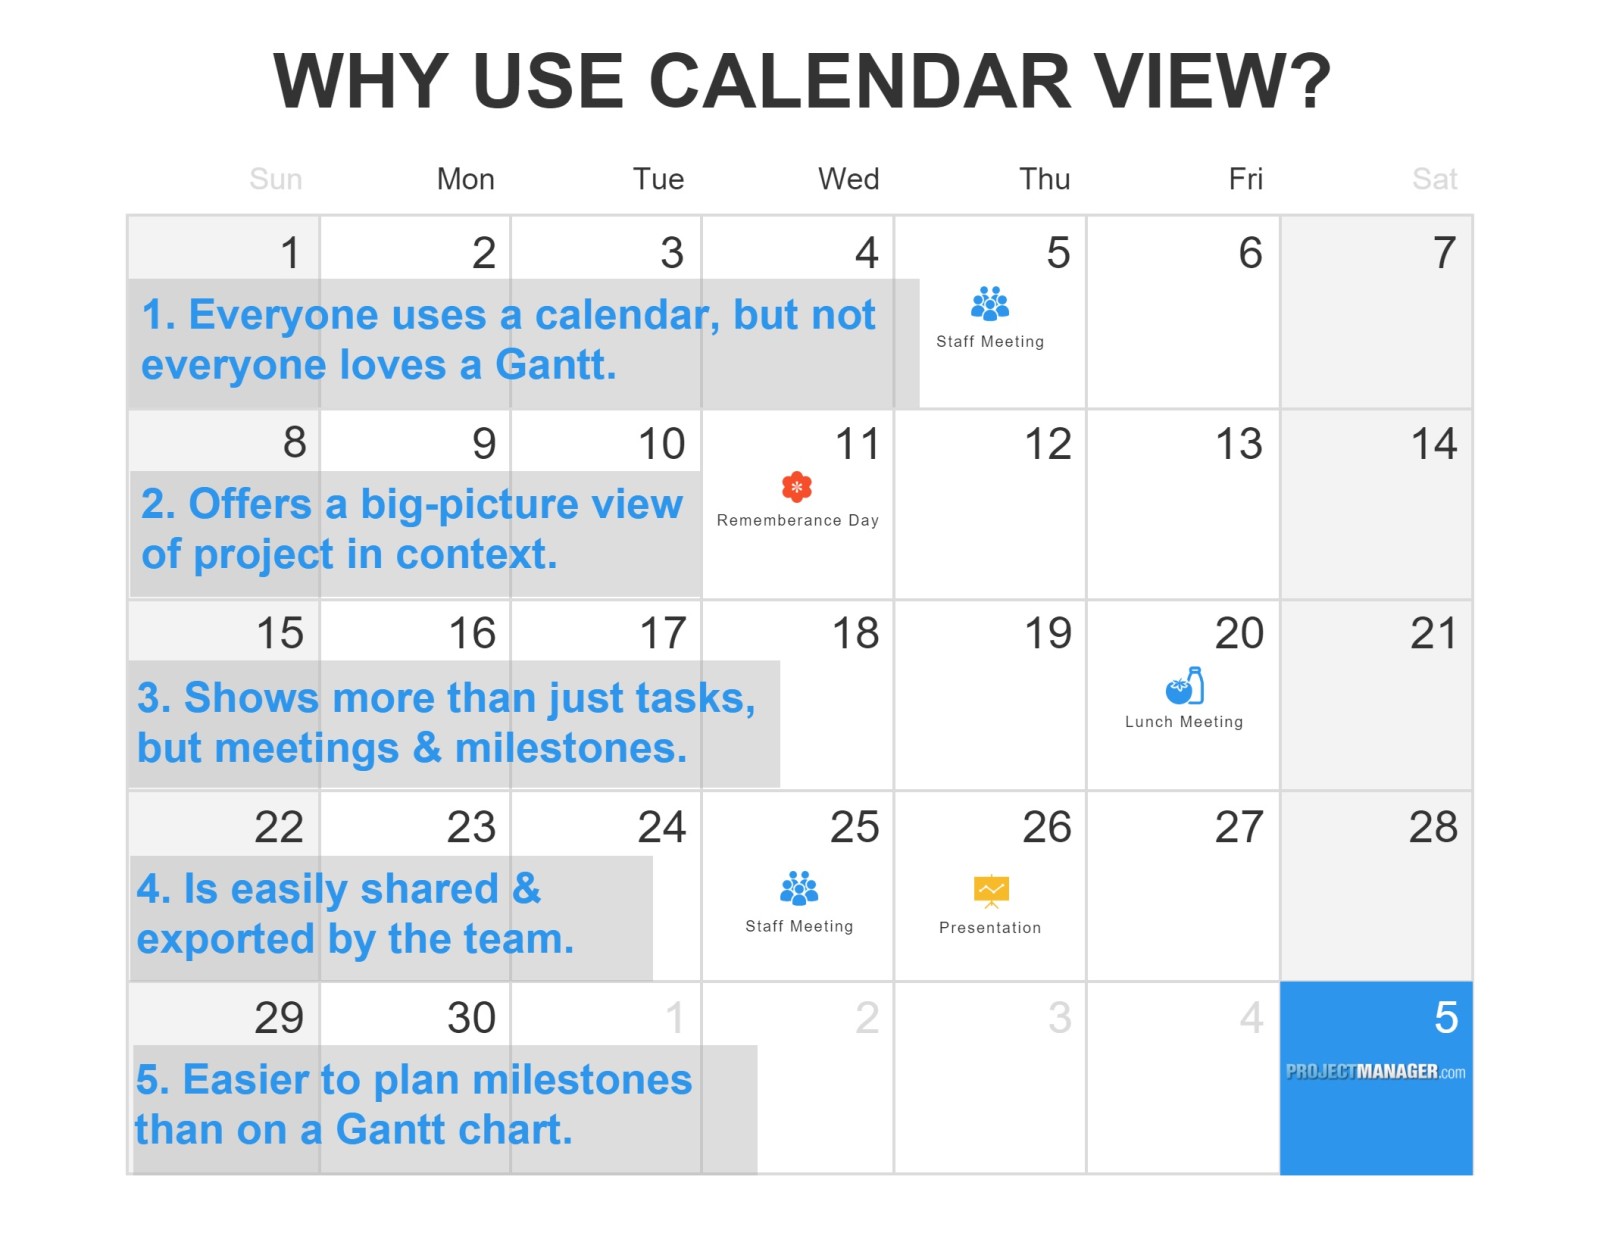 5 Reasons To Use Calendar View for Scheduling